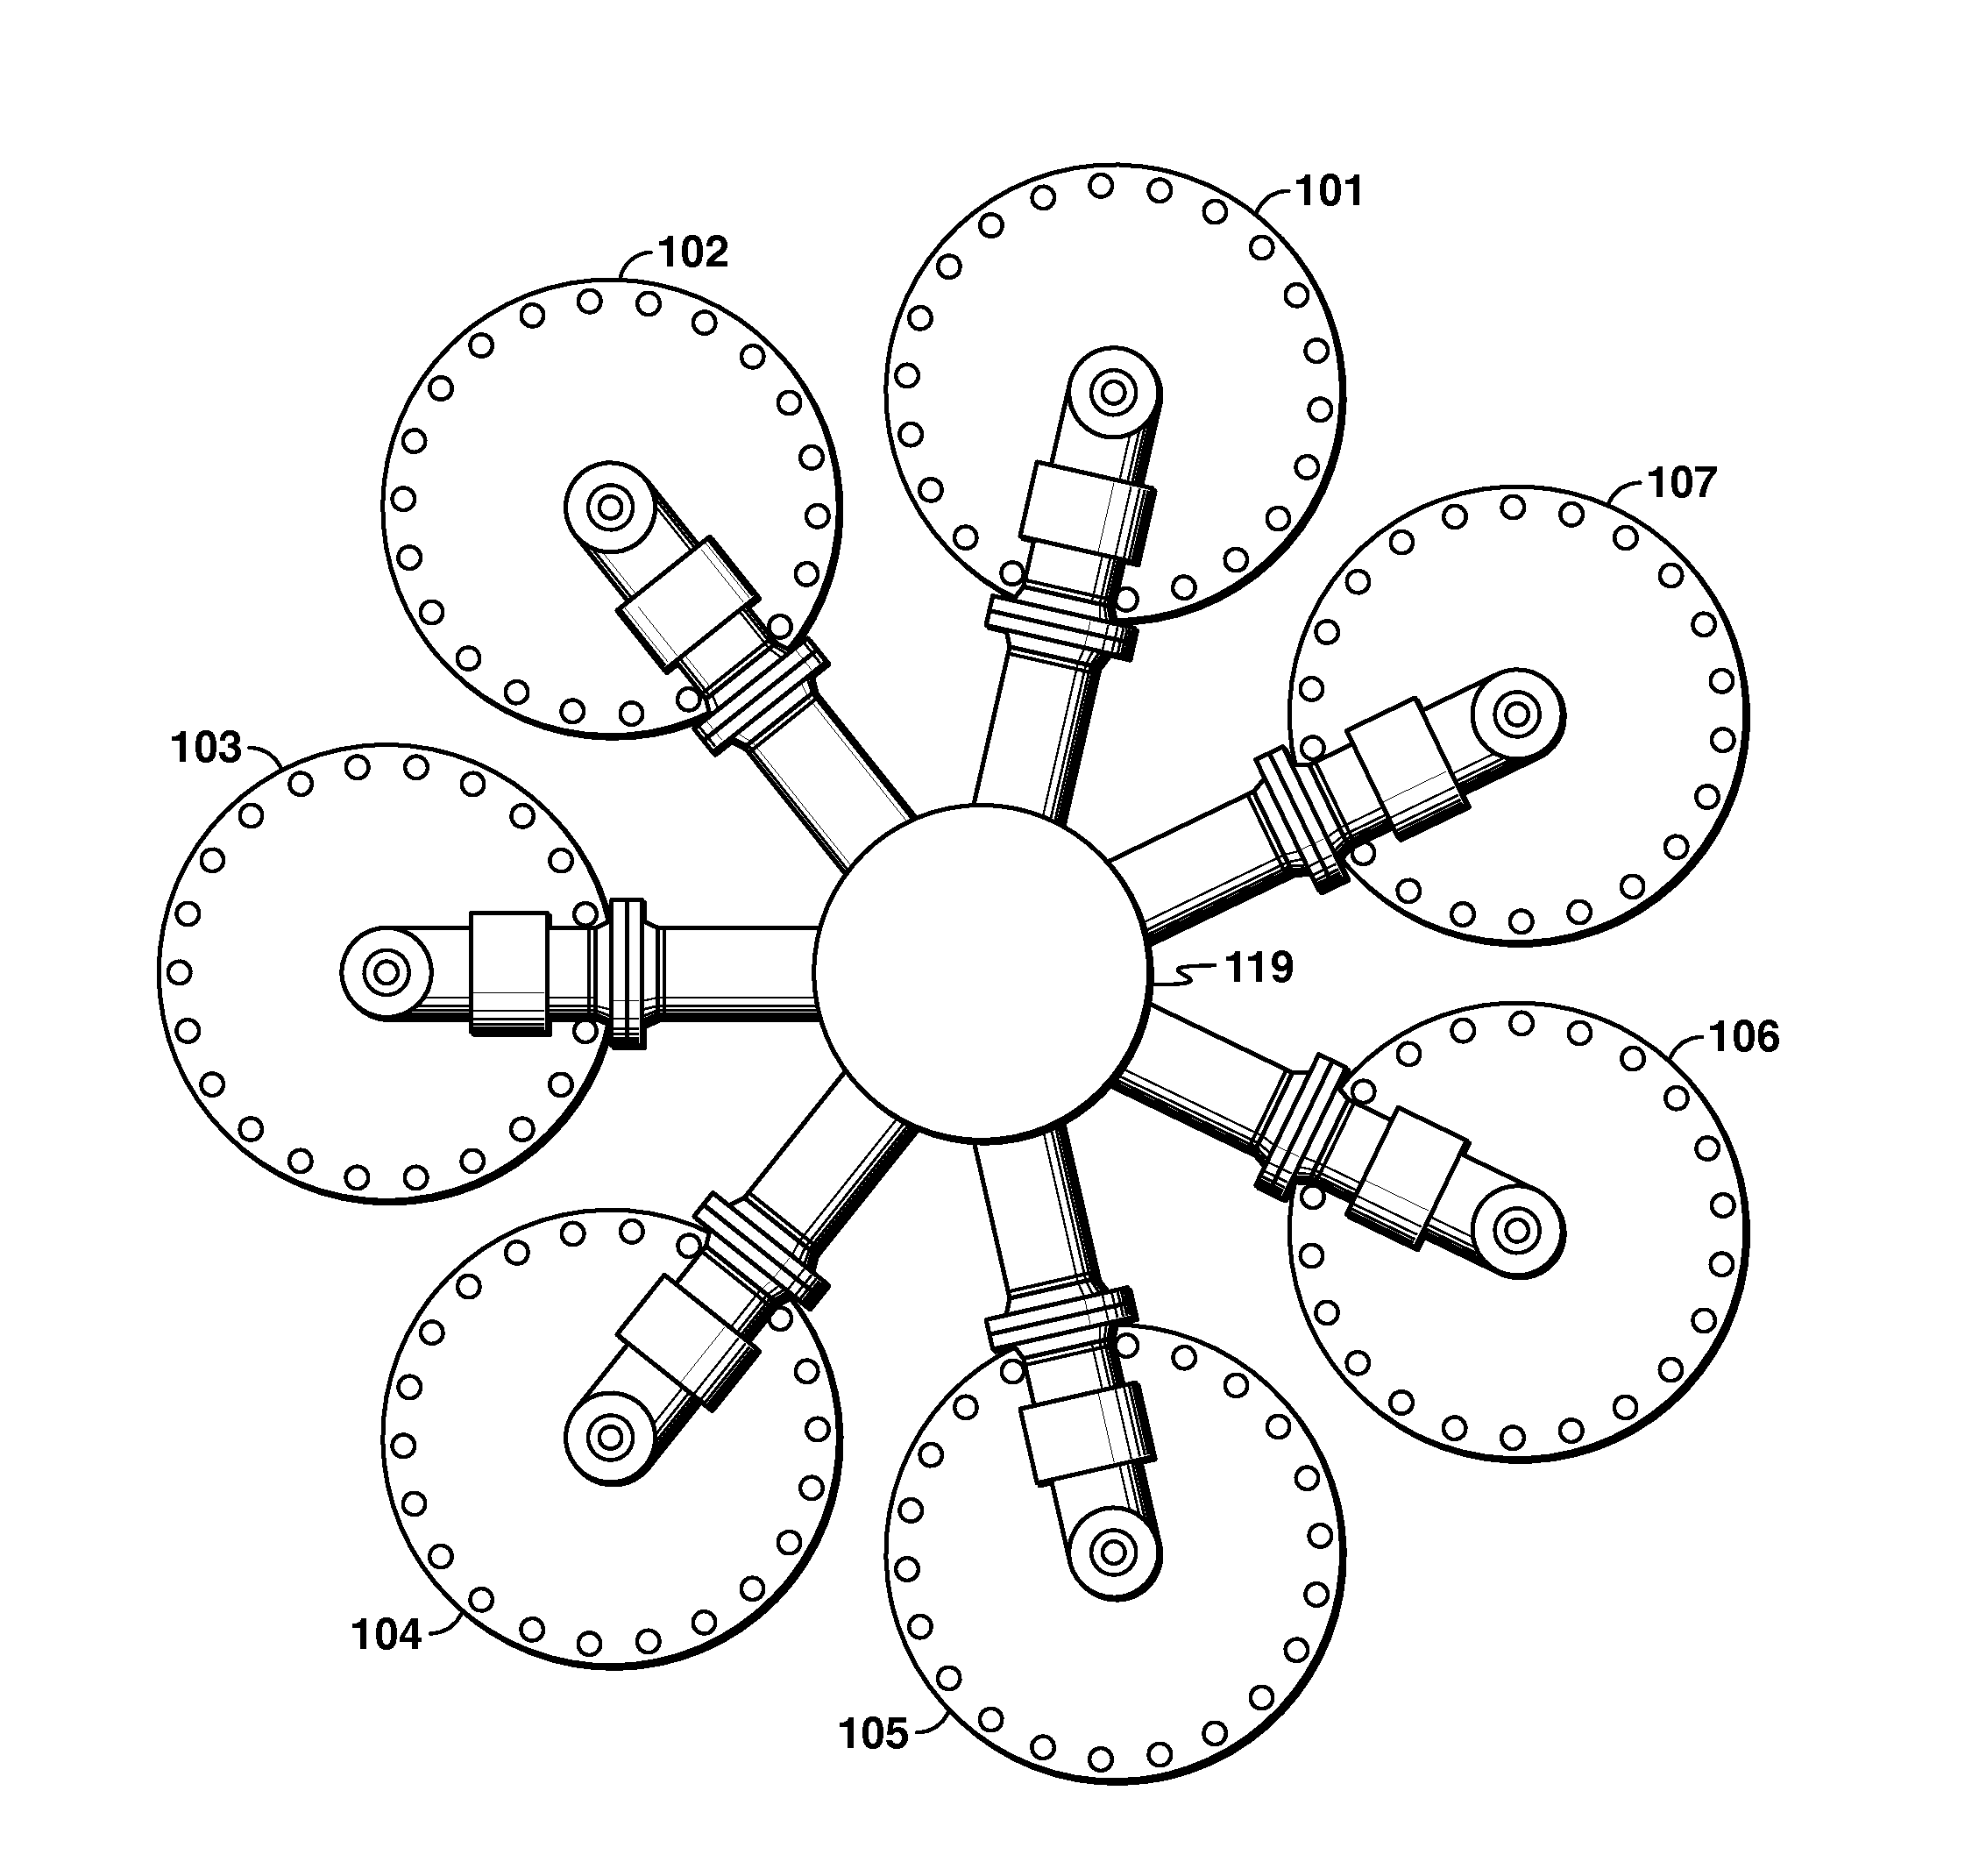 Apparatus and Systems Having a Rotary Valve Assembly and Swing Adsorption Processes Related Thereto